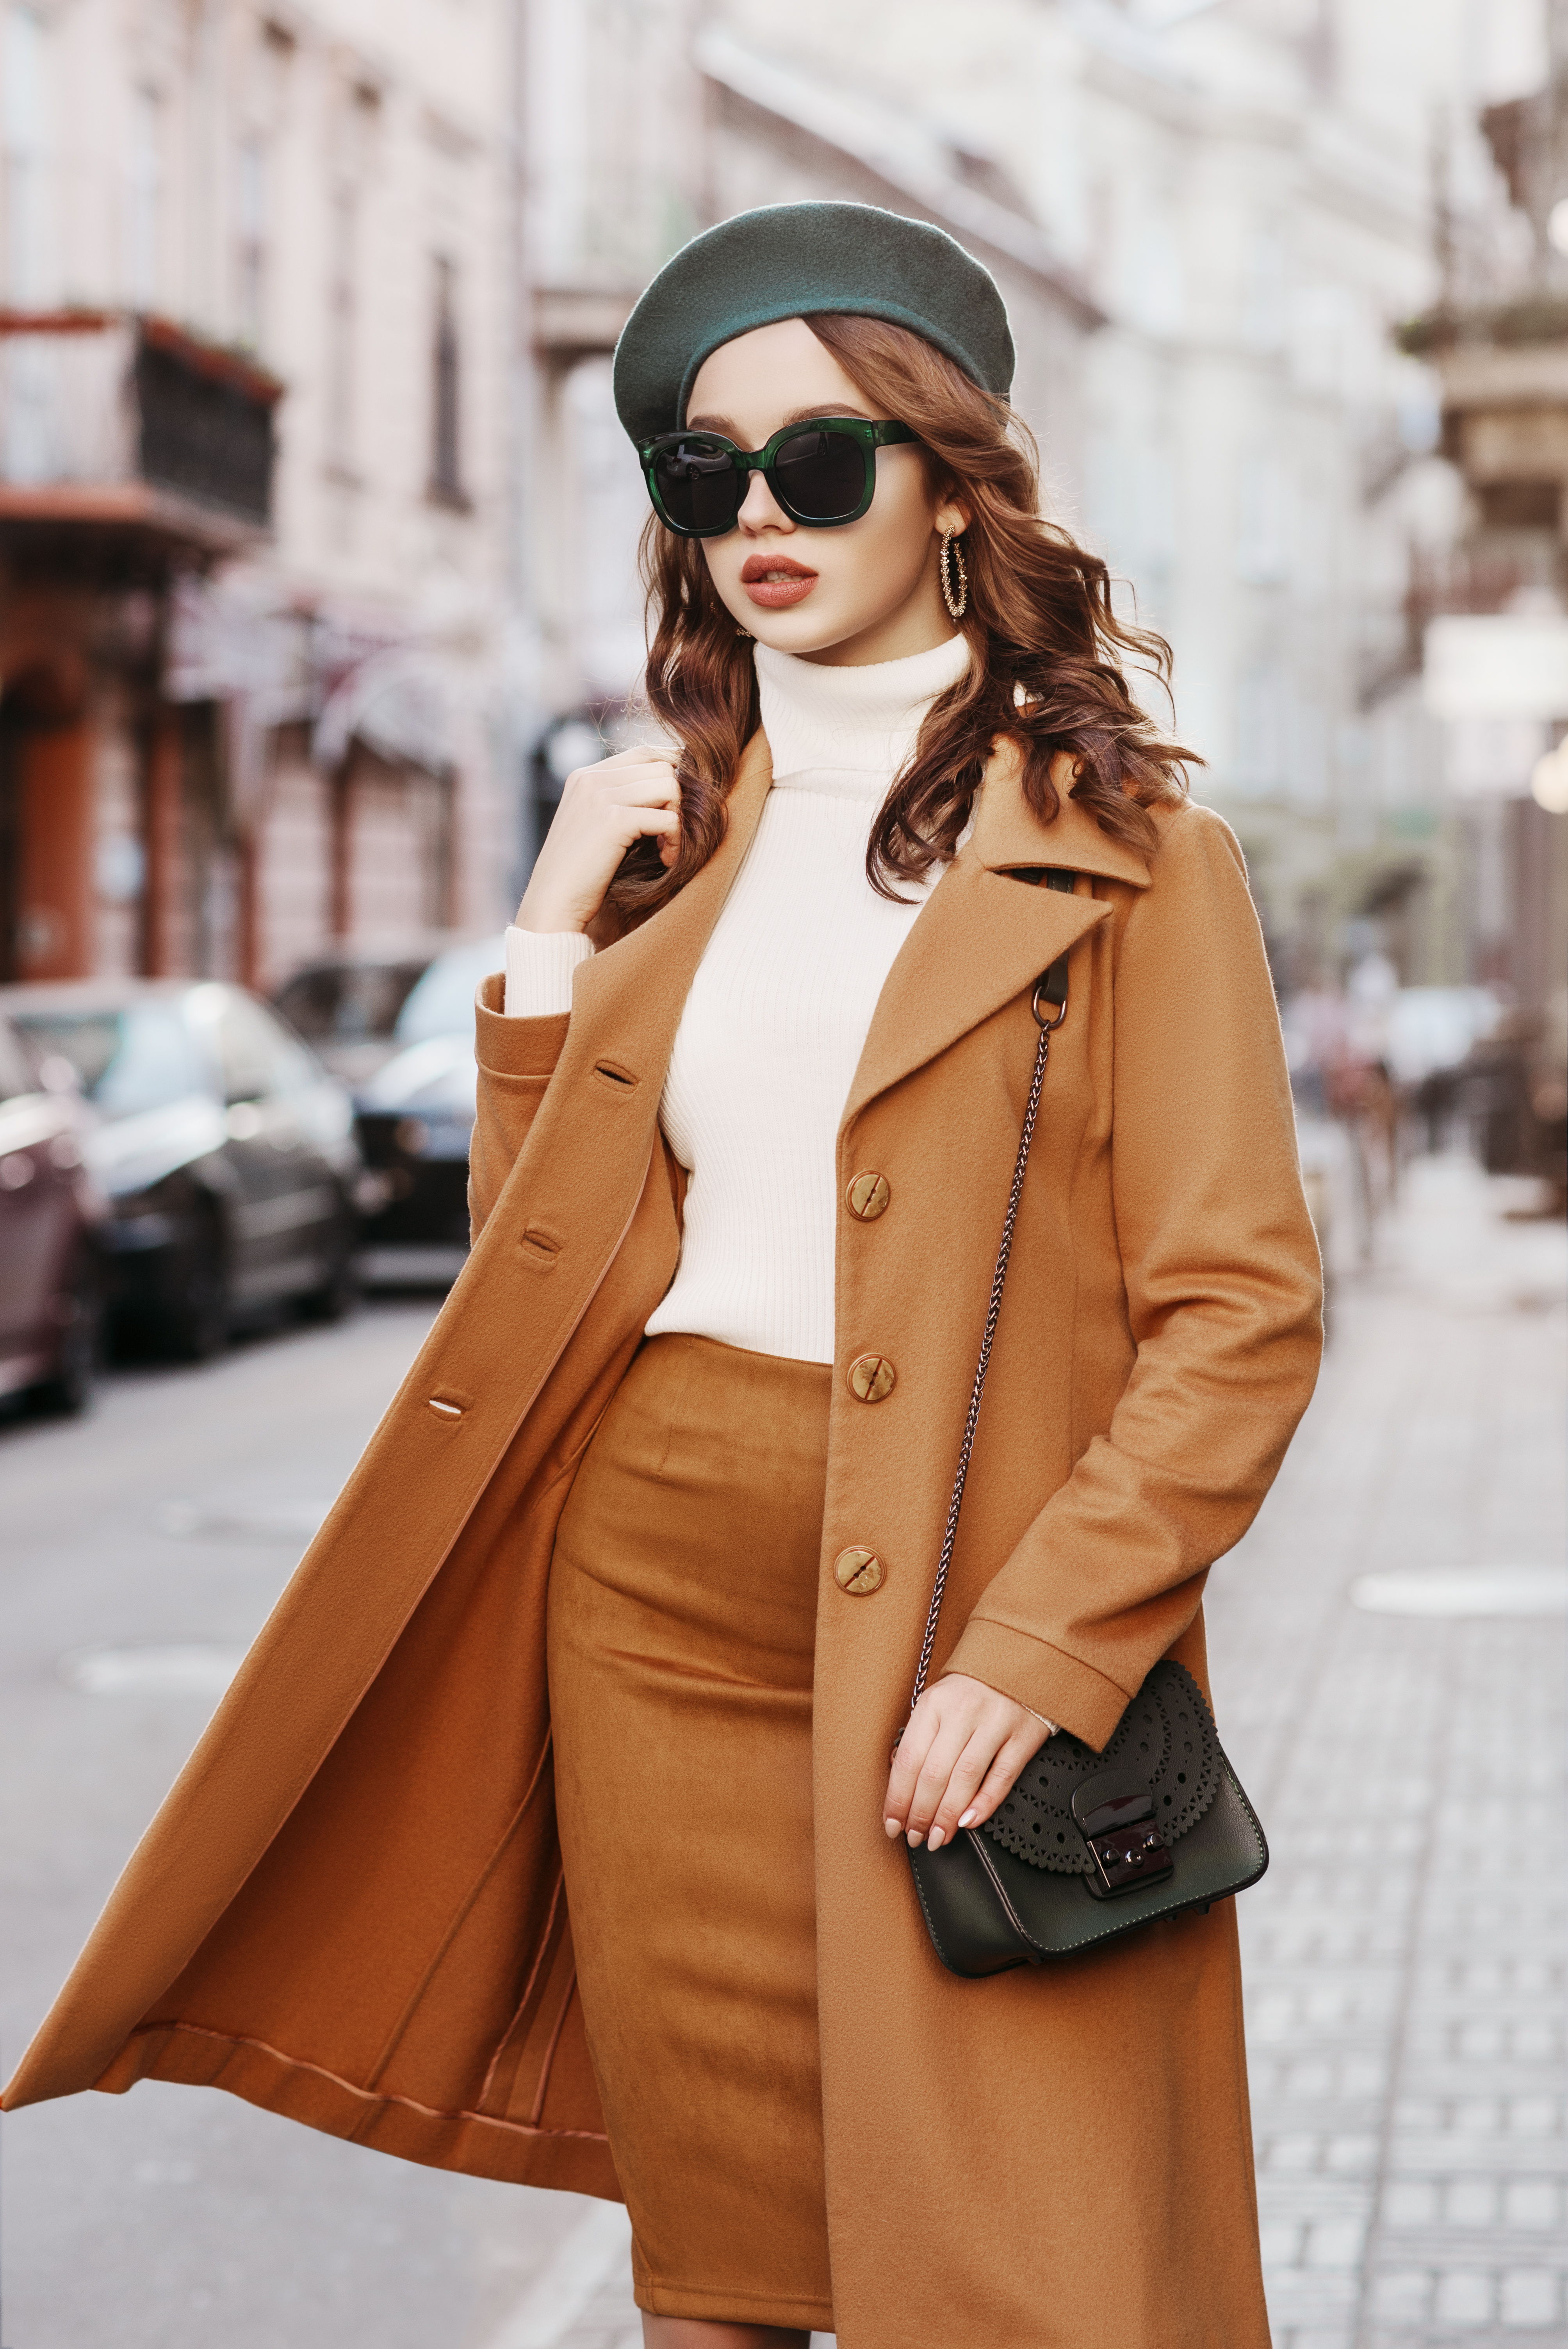 Outdoor portrait of young beautiful fashionable woman wearing trendy autumn coat, turtleneck, skirt, beret, sunglasses, with small shoulder bag, walking in street of european city